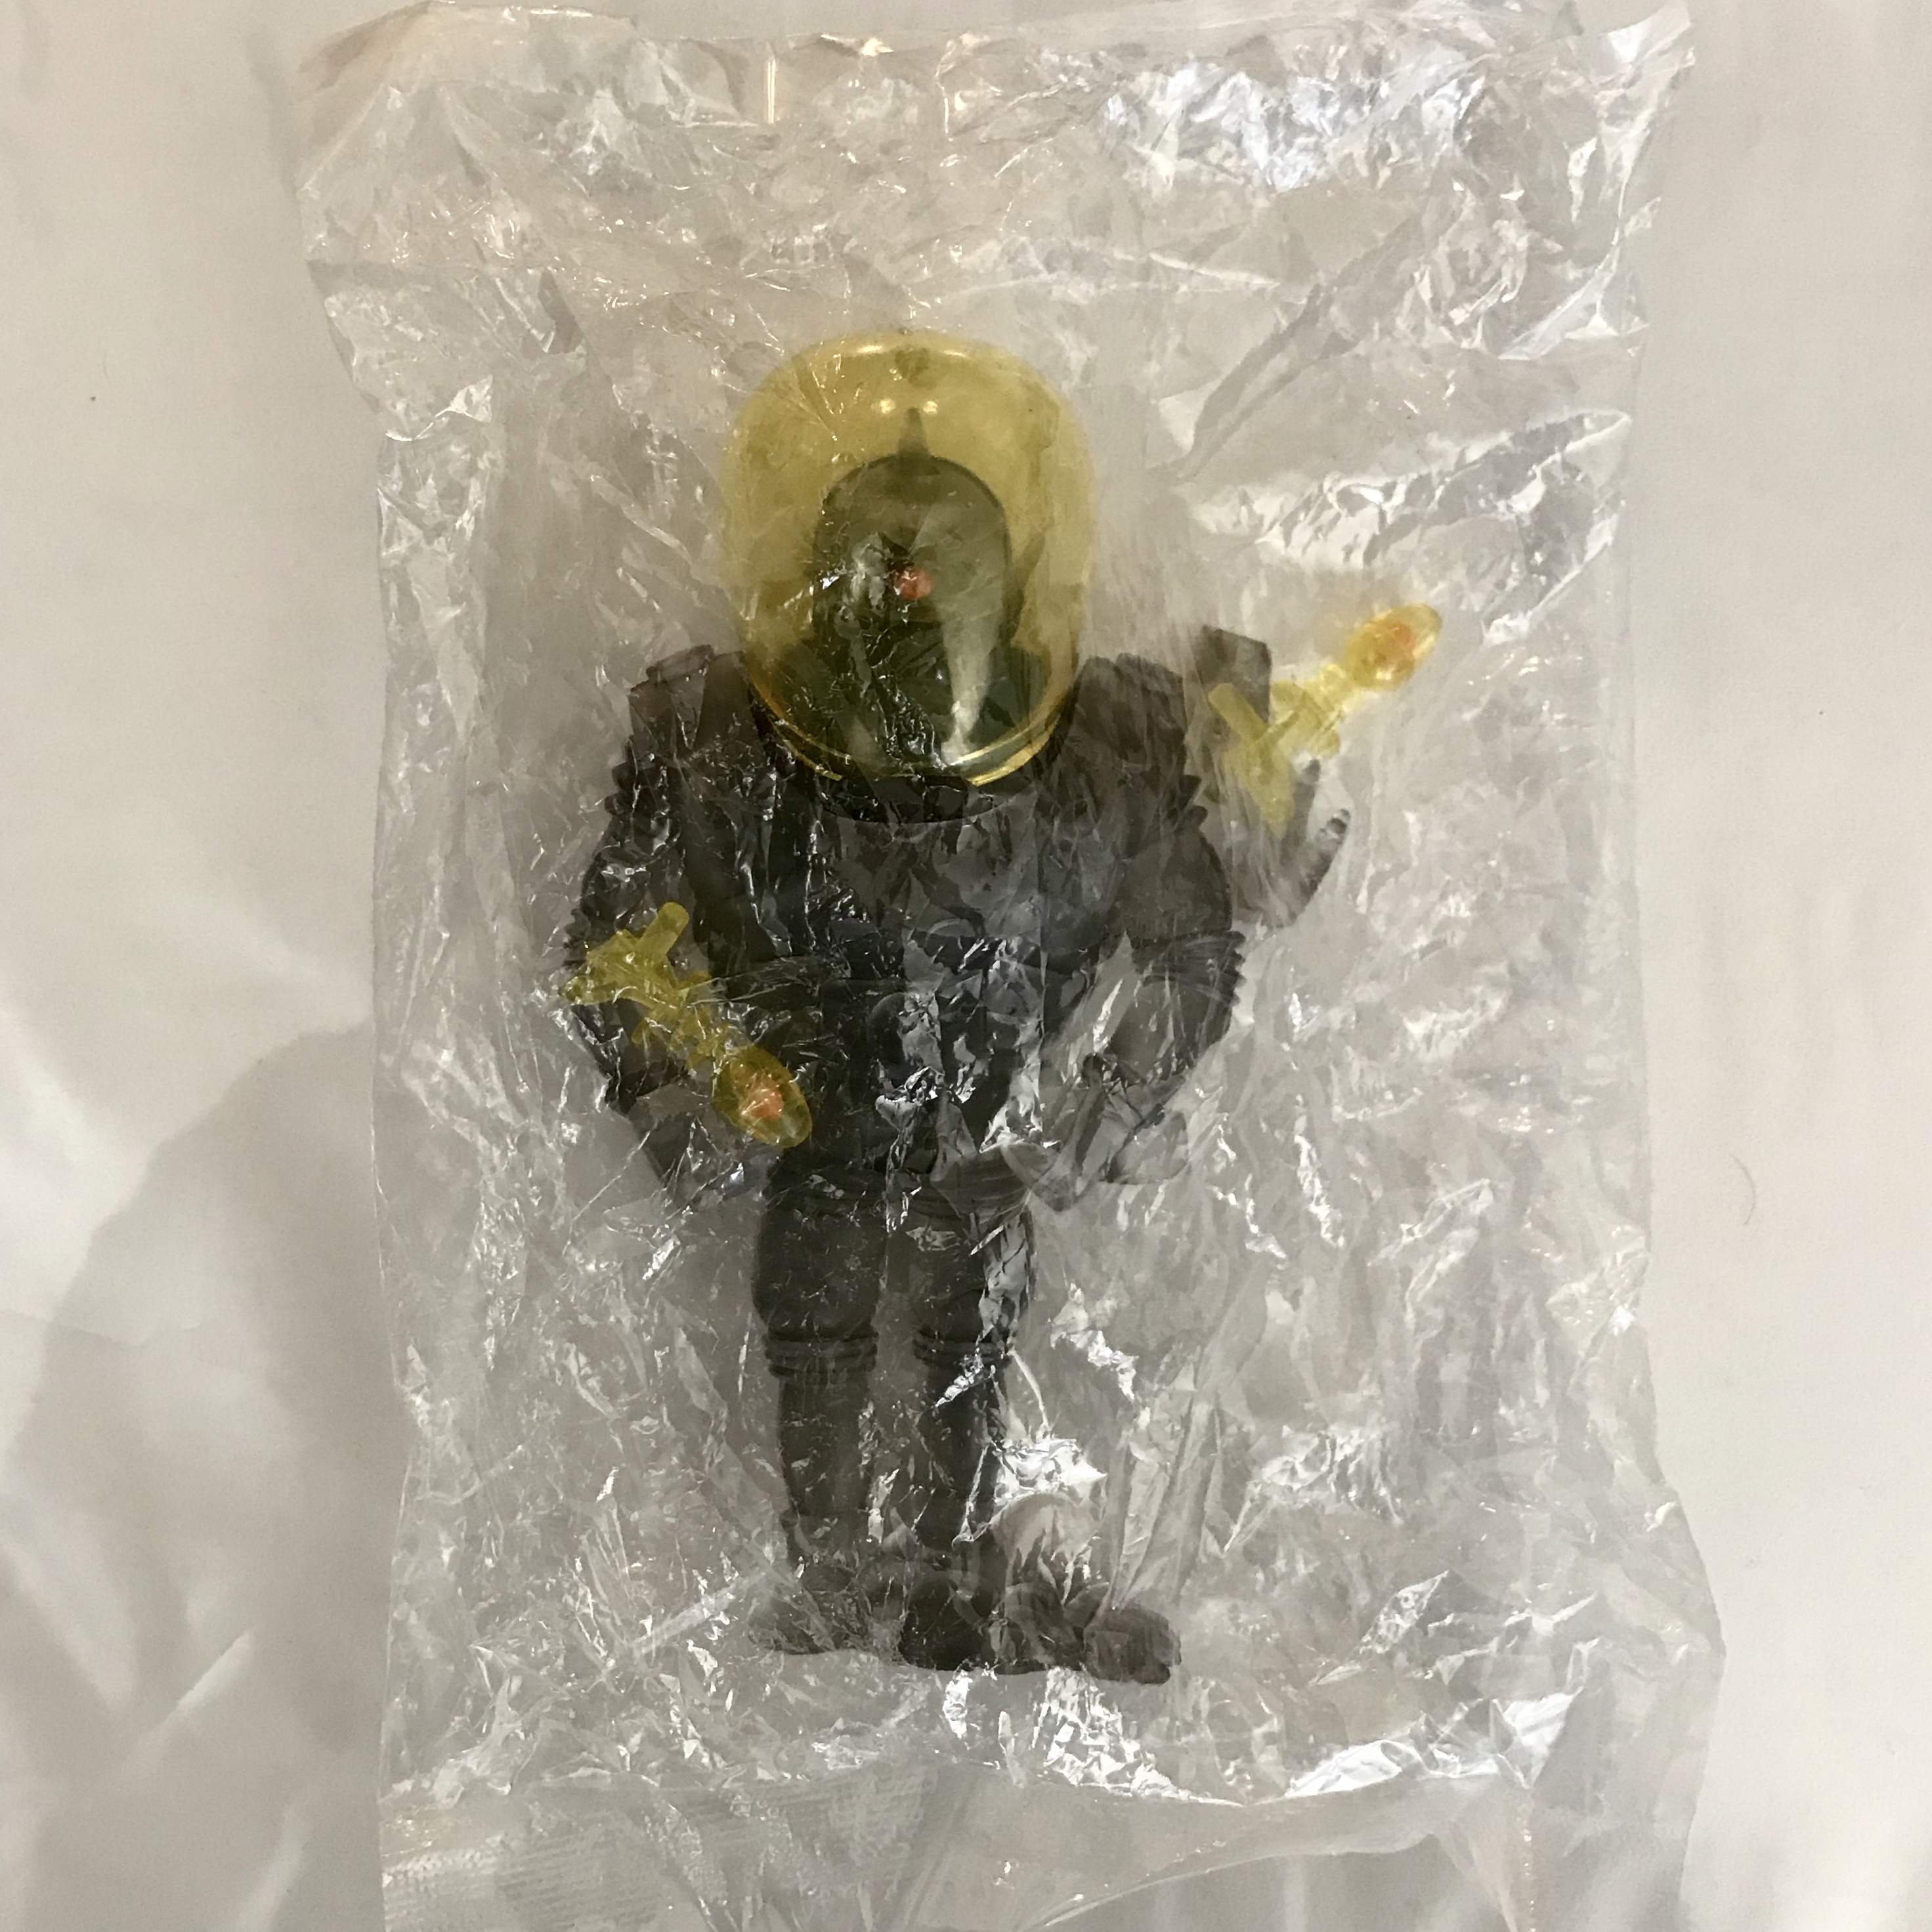 An action figure, 2012 CYCLOPS EXCLUSIVE NEW YORK COMIC CON SEALED IN FACTORY BAG.